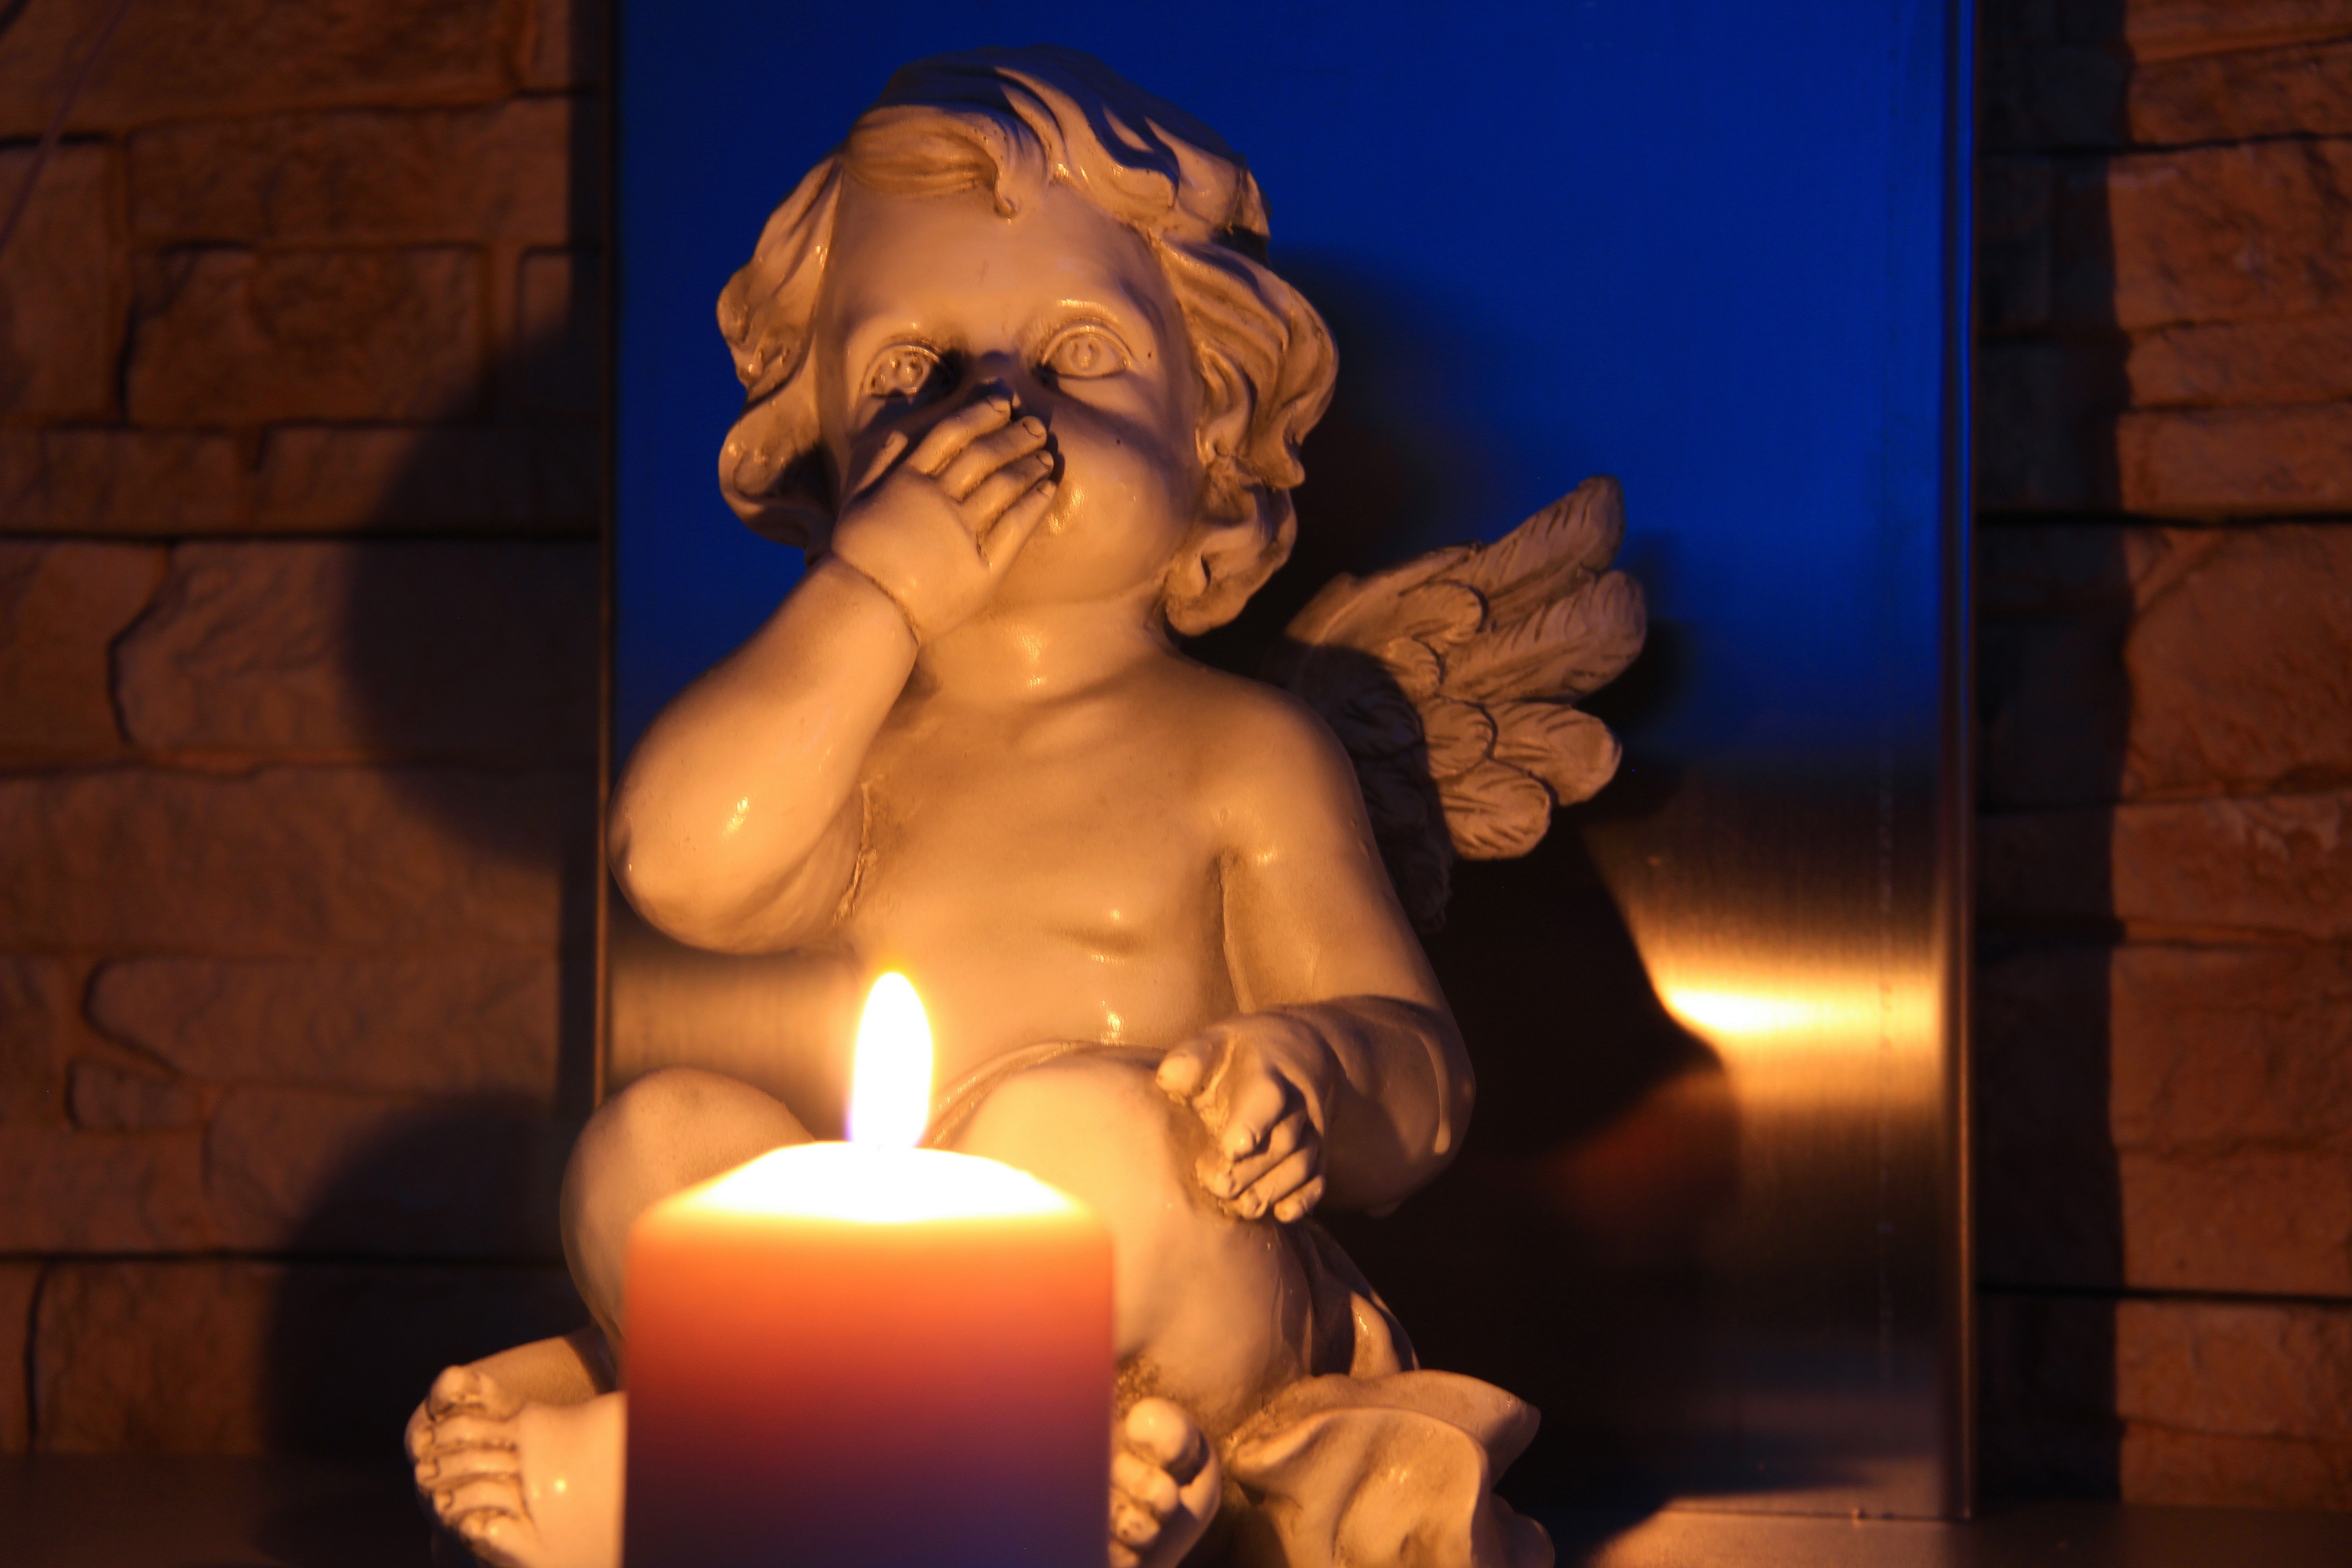 lighted candle in front of cherub ceramic figurine inside room